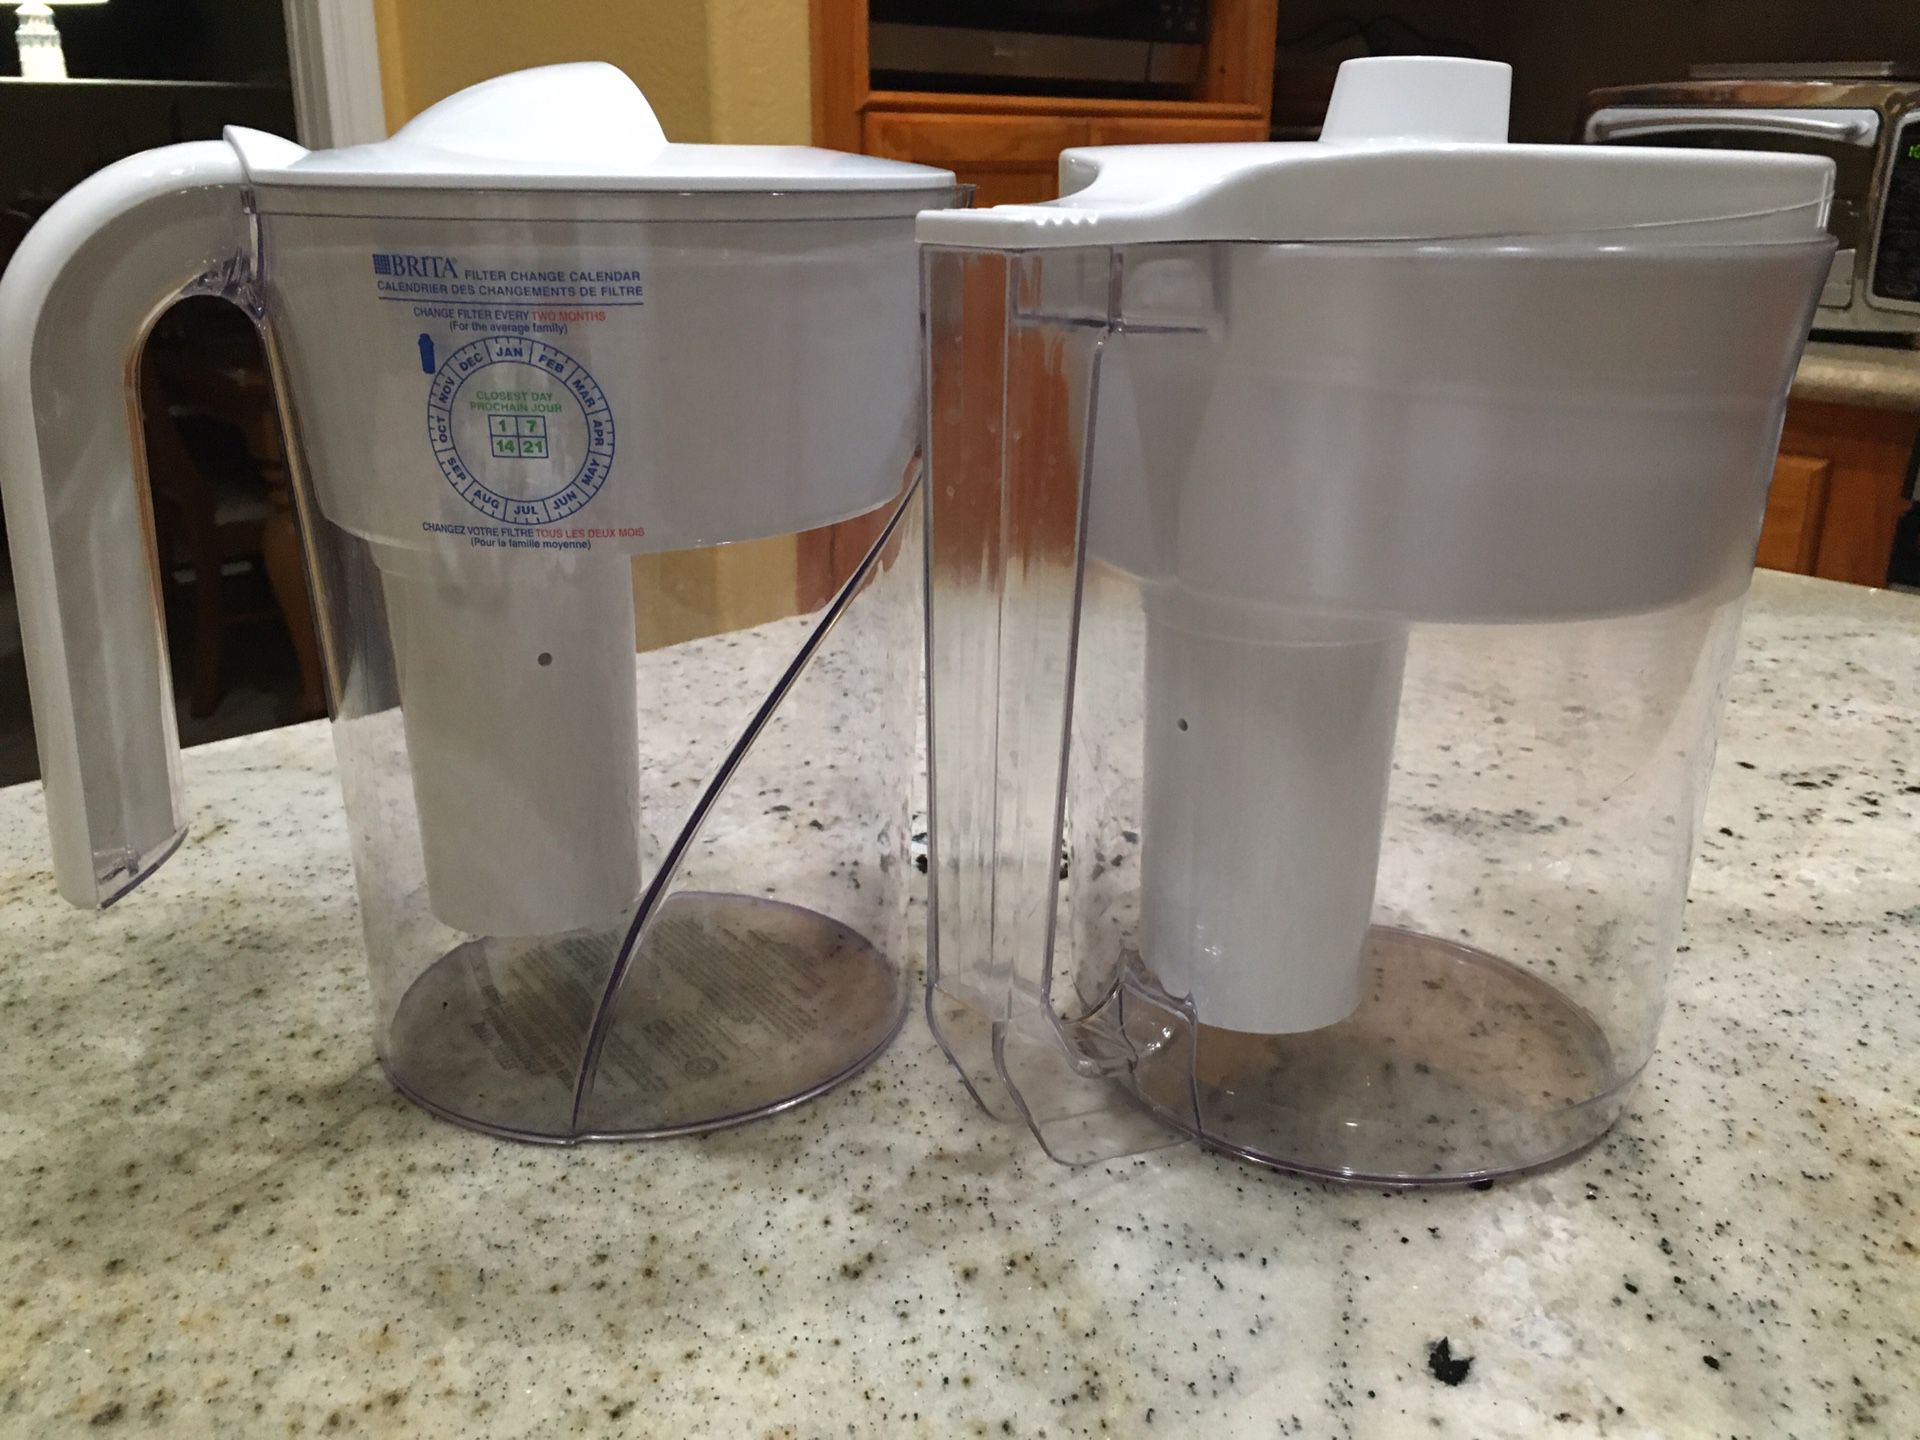 2 Brita Water Filter Pitchers. Great condition. Filter not included.